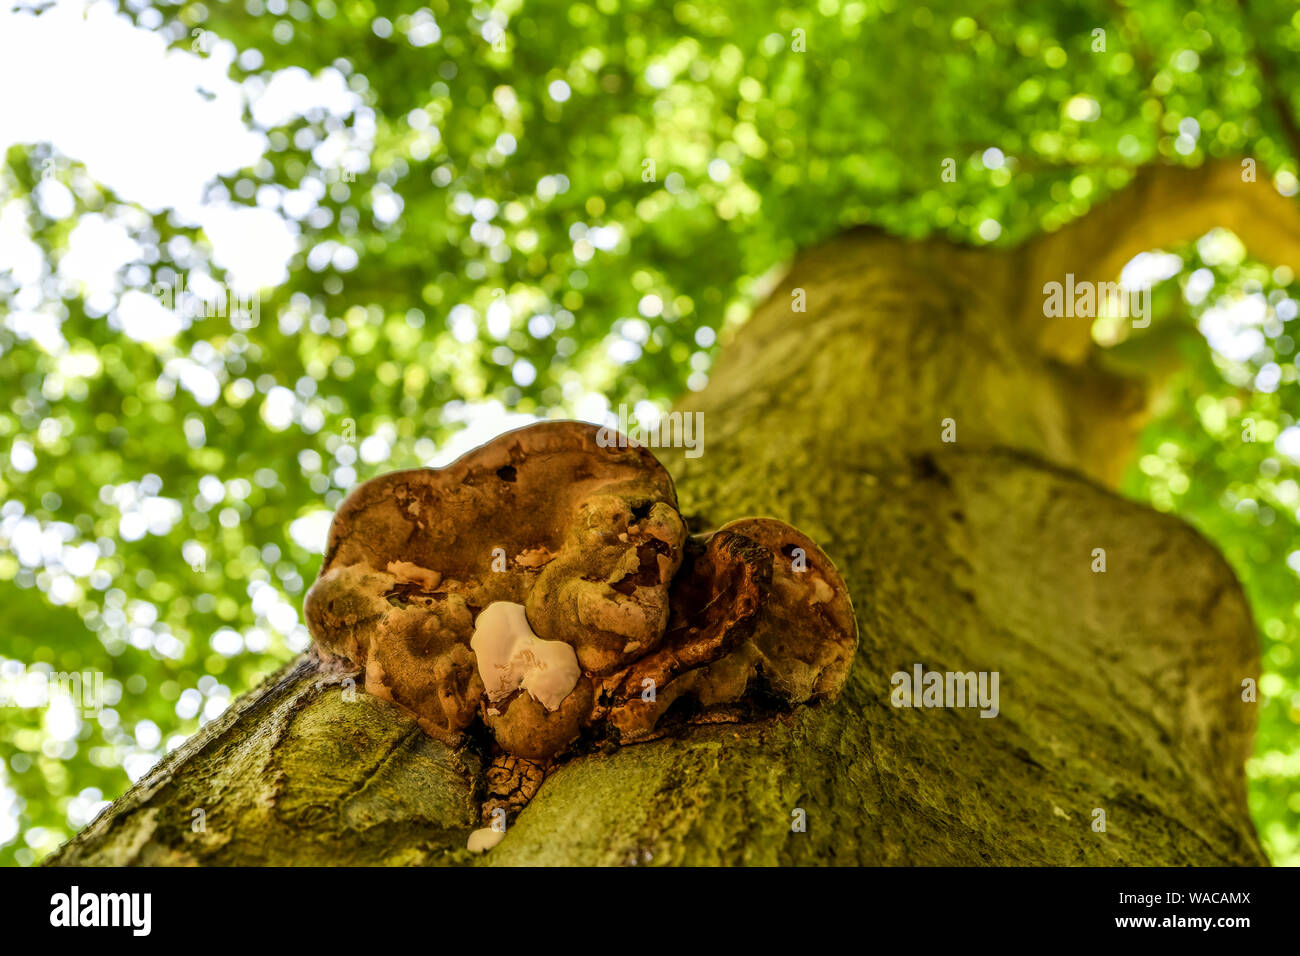 Blenheim Palace. Old tree with mushroom / fungal growth. Looking up at tree canopy. Woodstock, Oxfordshire, England, United Kingdom. Stock Photo